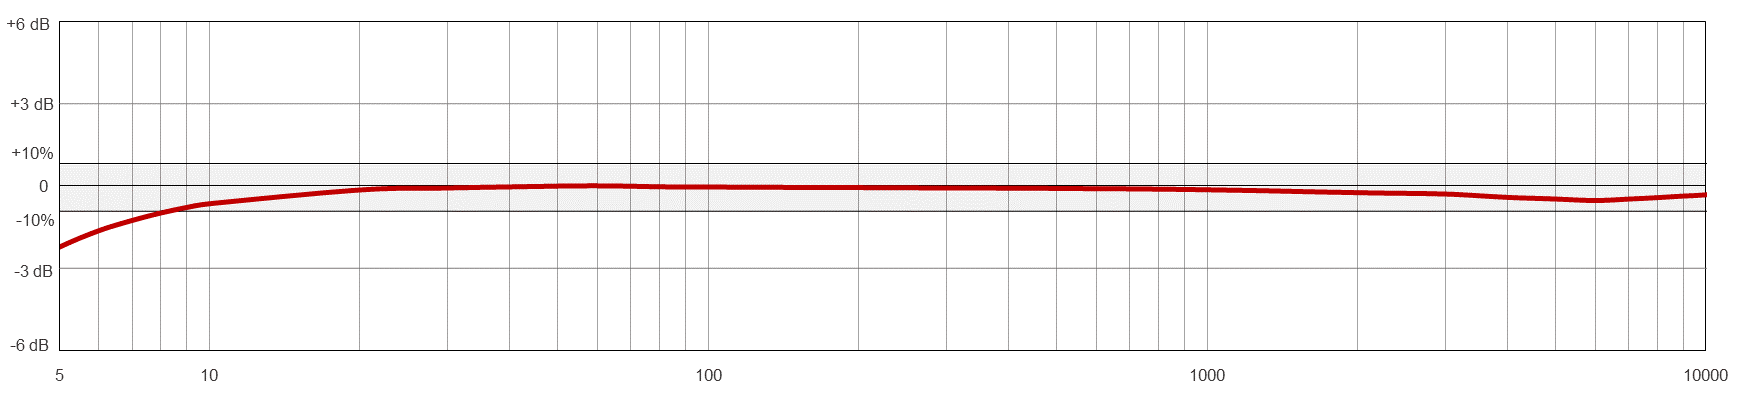 AC166TYPICAL FREQUENCY RESPONSE